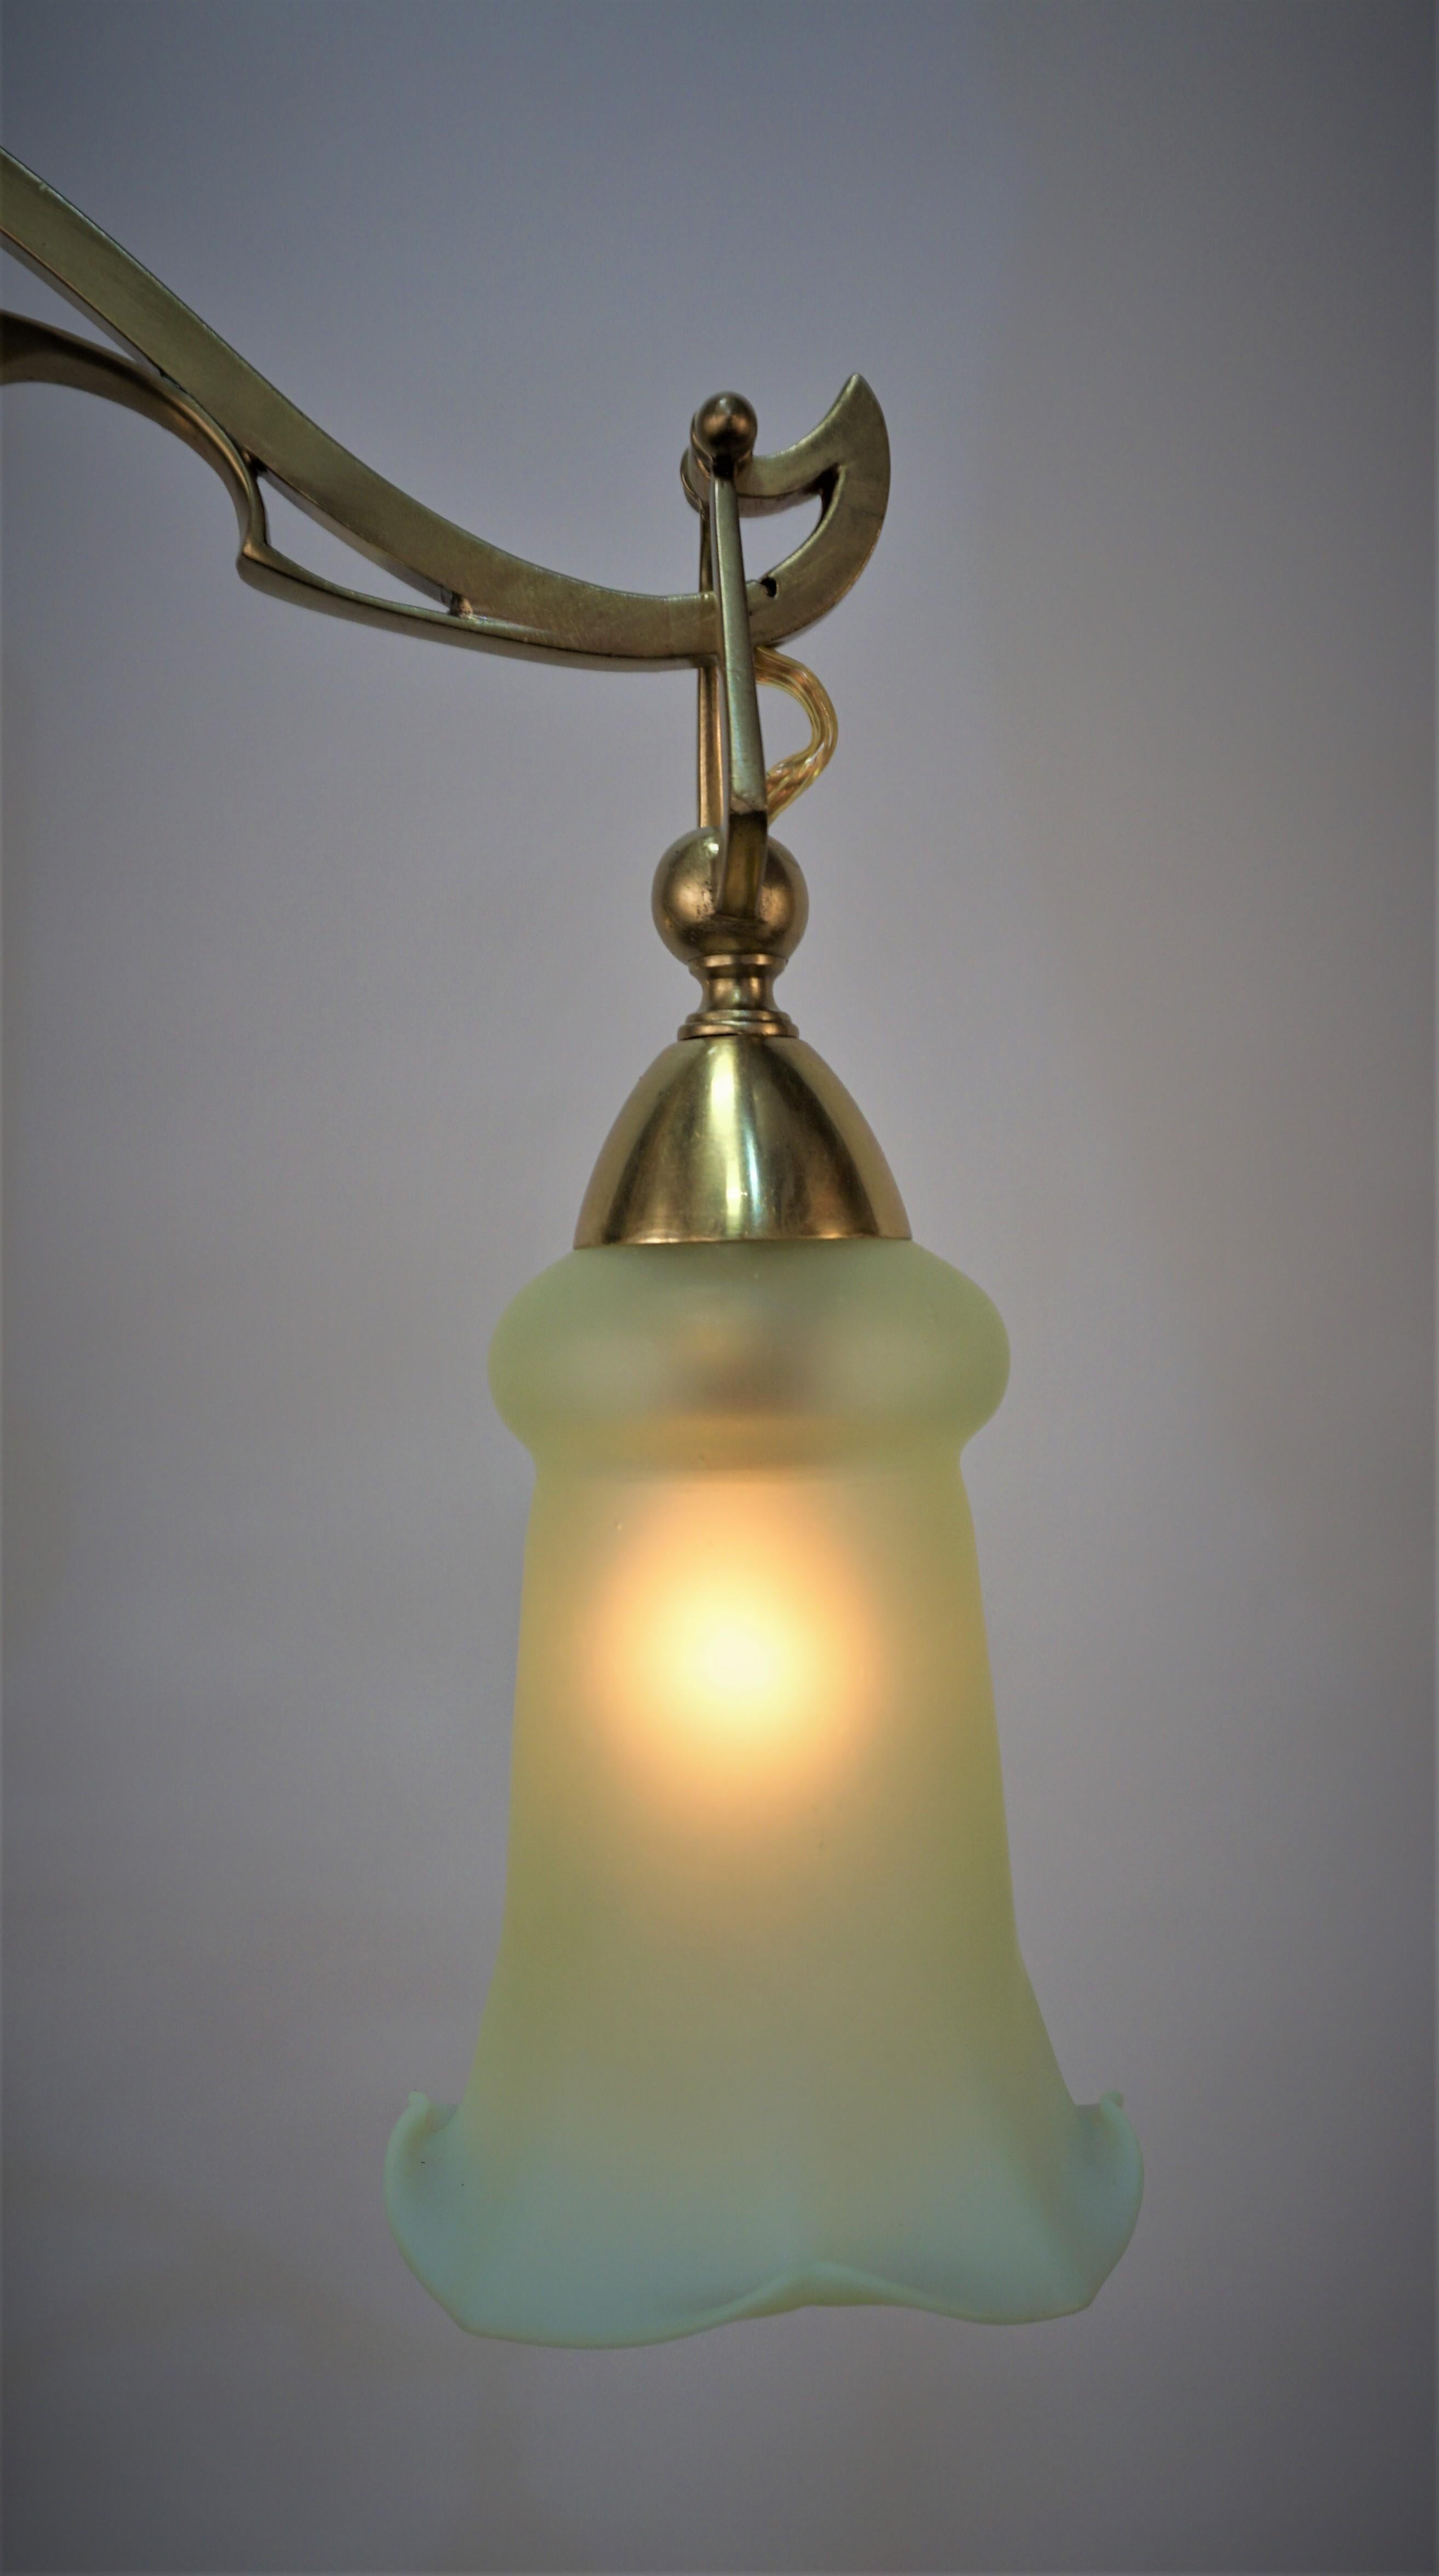 Fantastic brass Art Nouveau - Arts & Crafts chandelier with three beautiful opalescent glass shades.